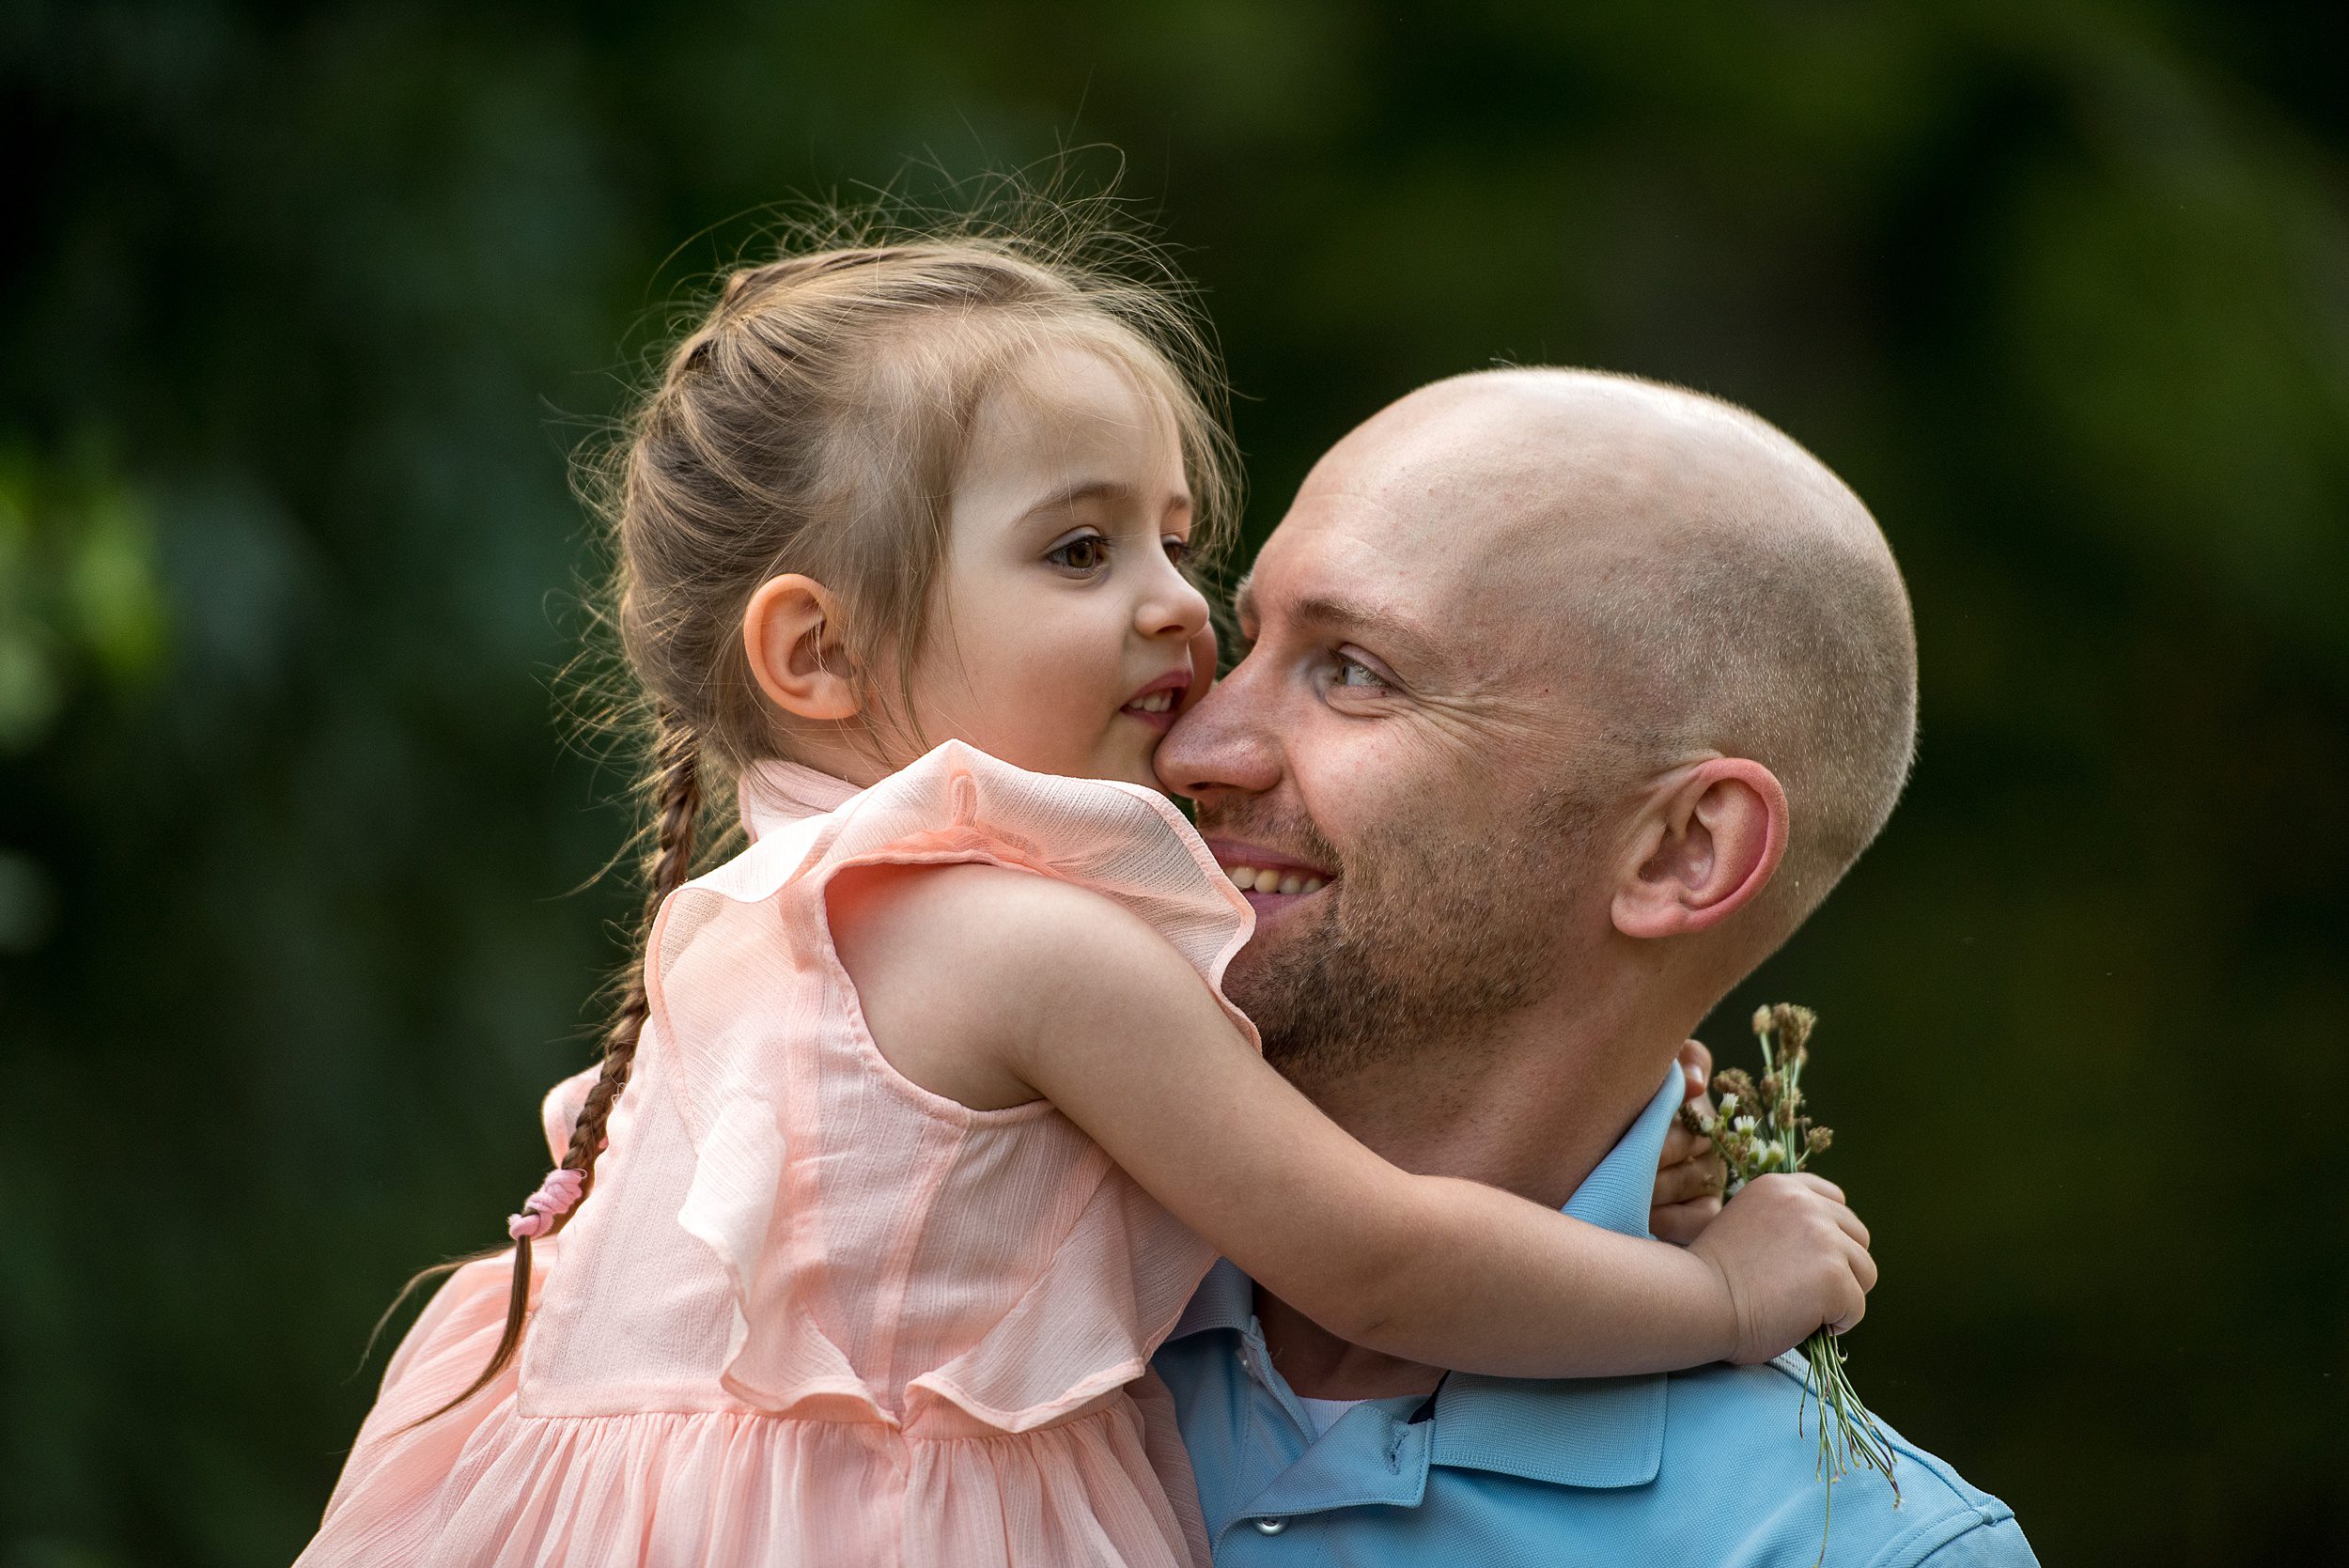 A Happy father explores a park picking flowers with his toddler daughter in a pink dress